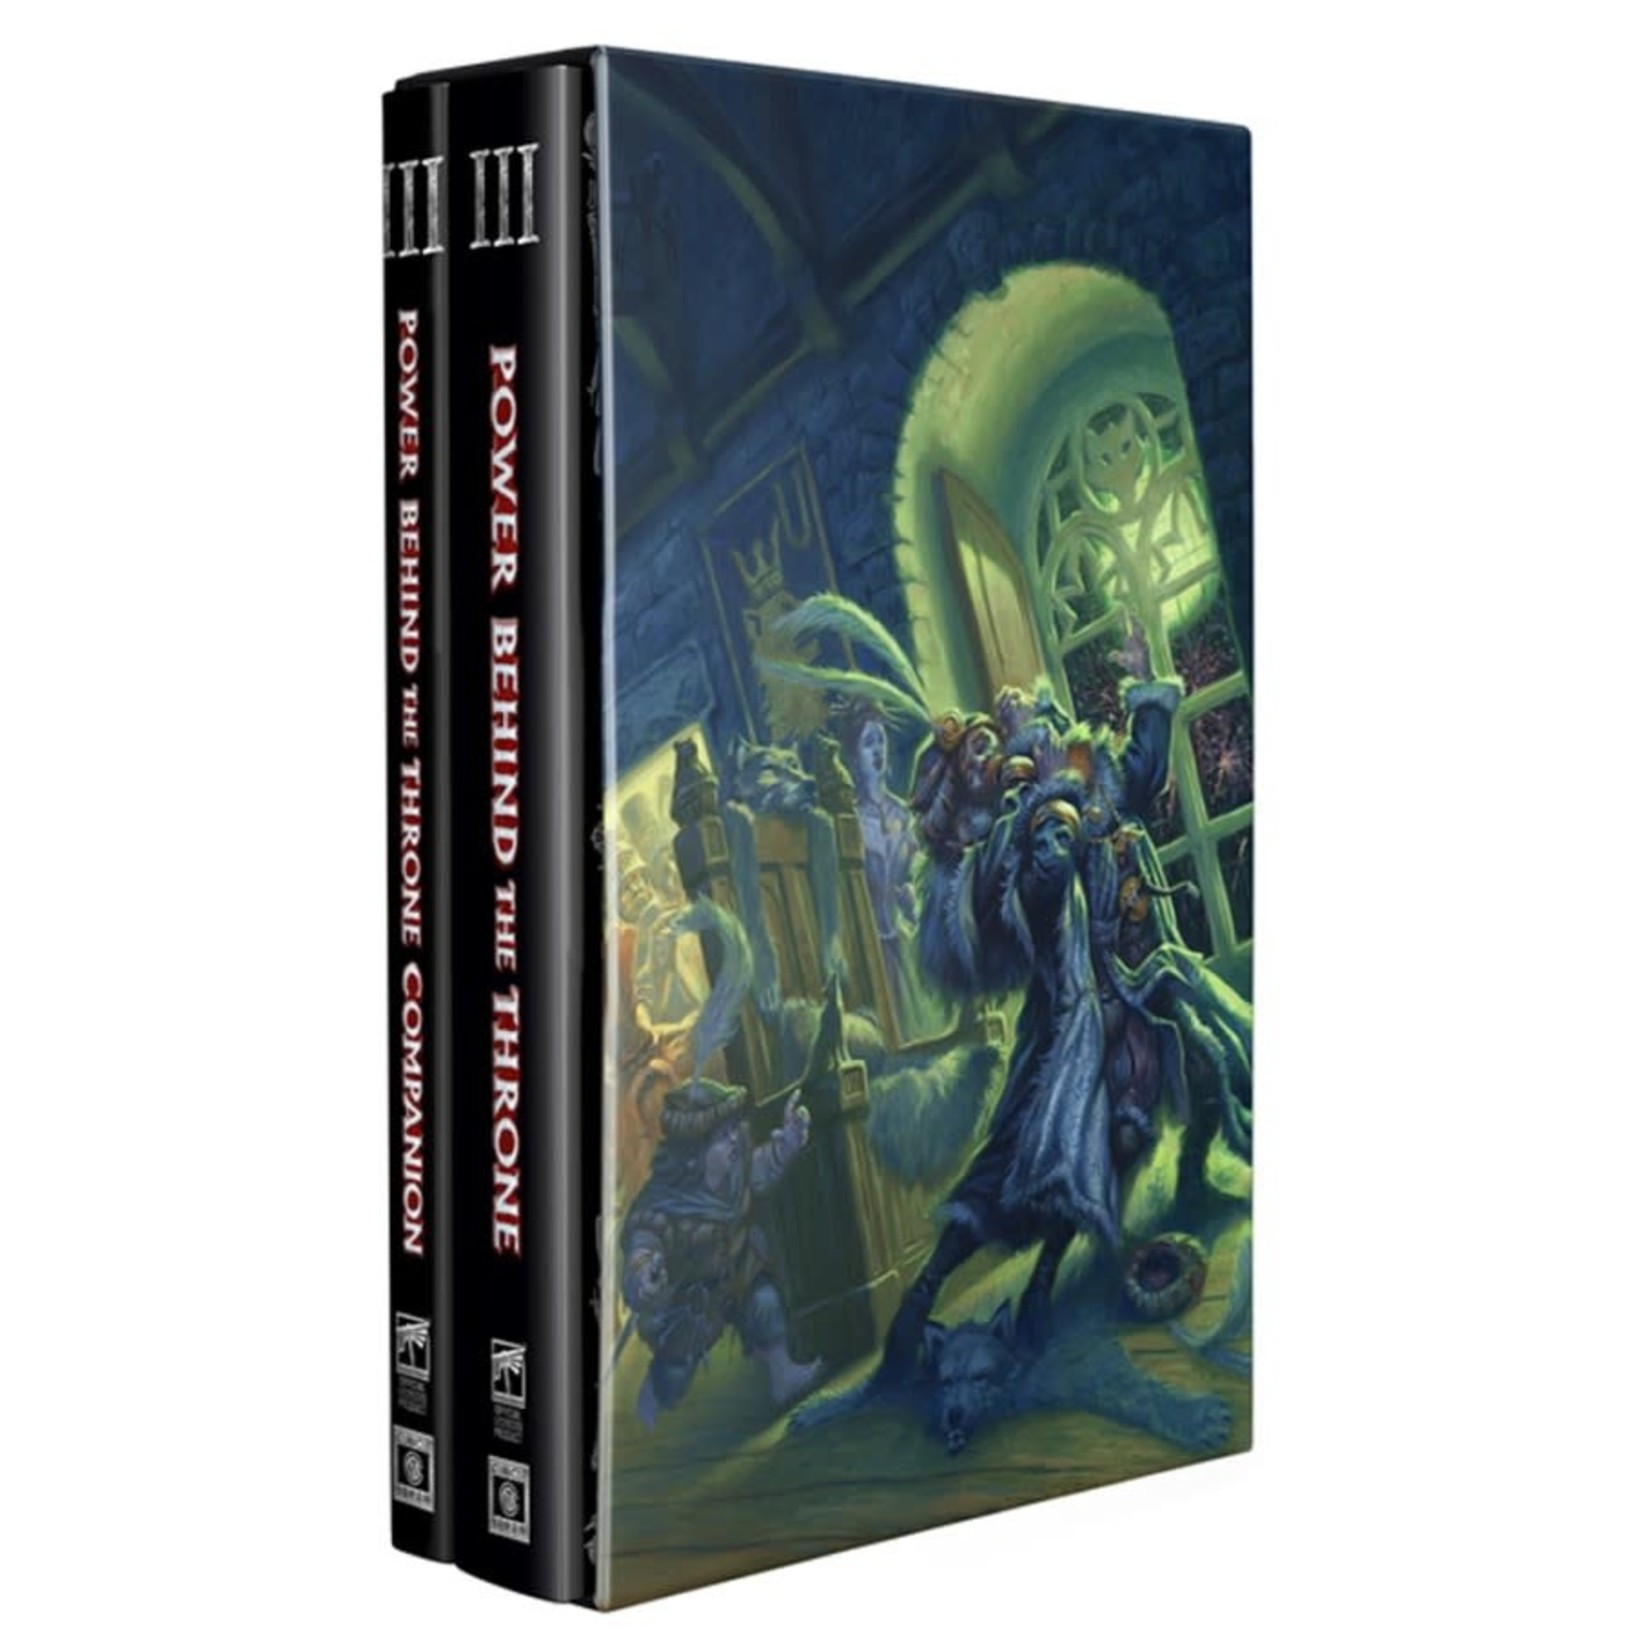 Cubicle 7 Warhammer Fantasy Roleplay: Power Behind the Throne Slipcase